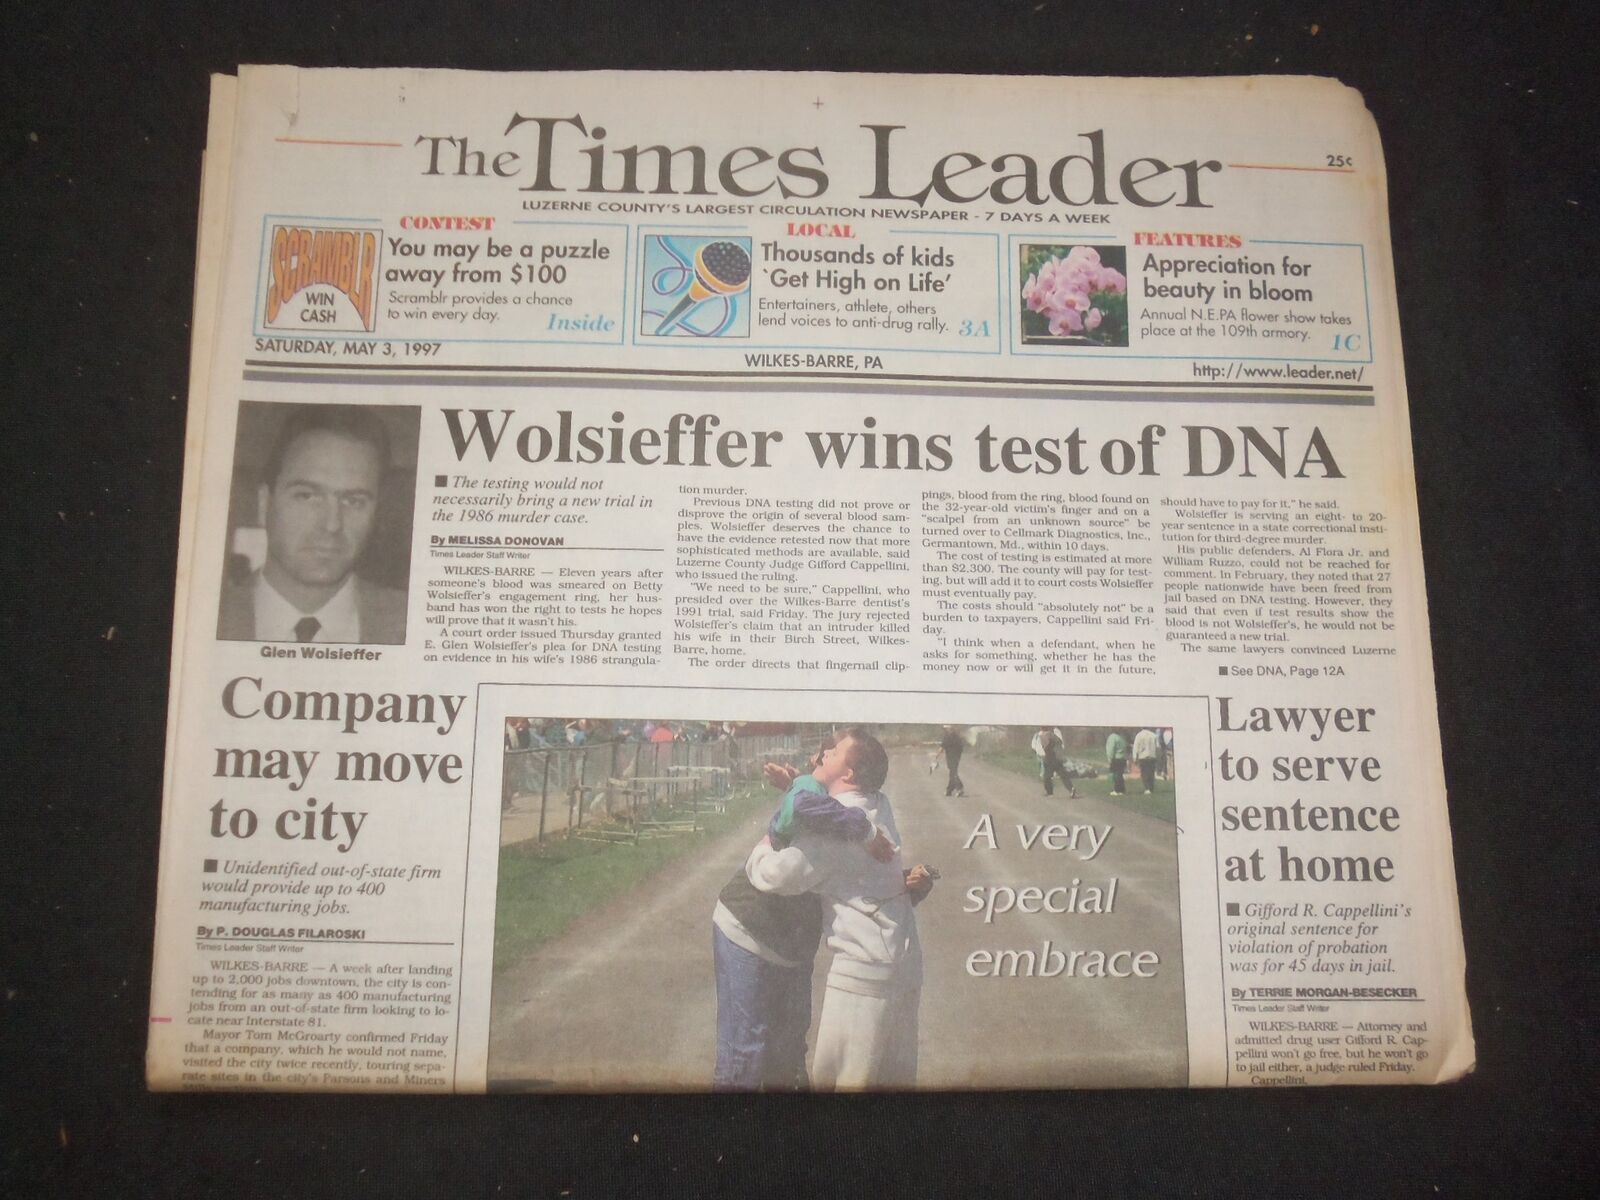 1997 MAY 3 WILKES-BARRE TIMES LEADER - WOLSIEFFER WINS TEST OF DNA - NP 7731